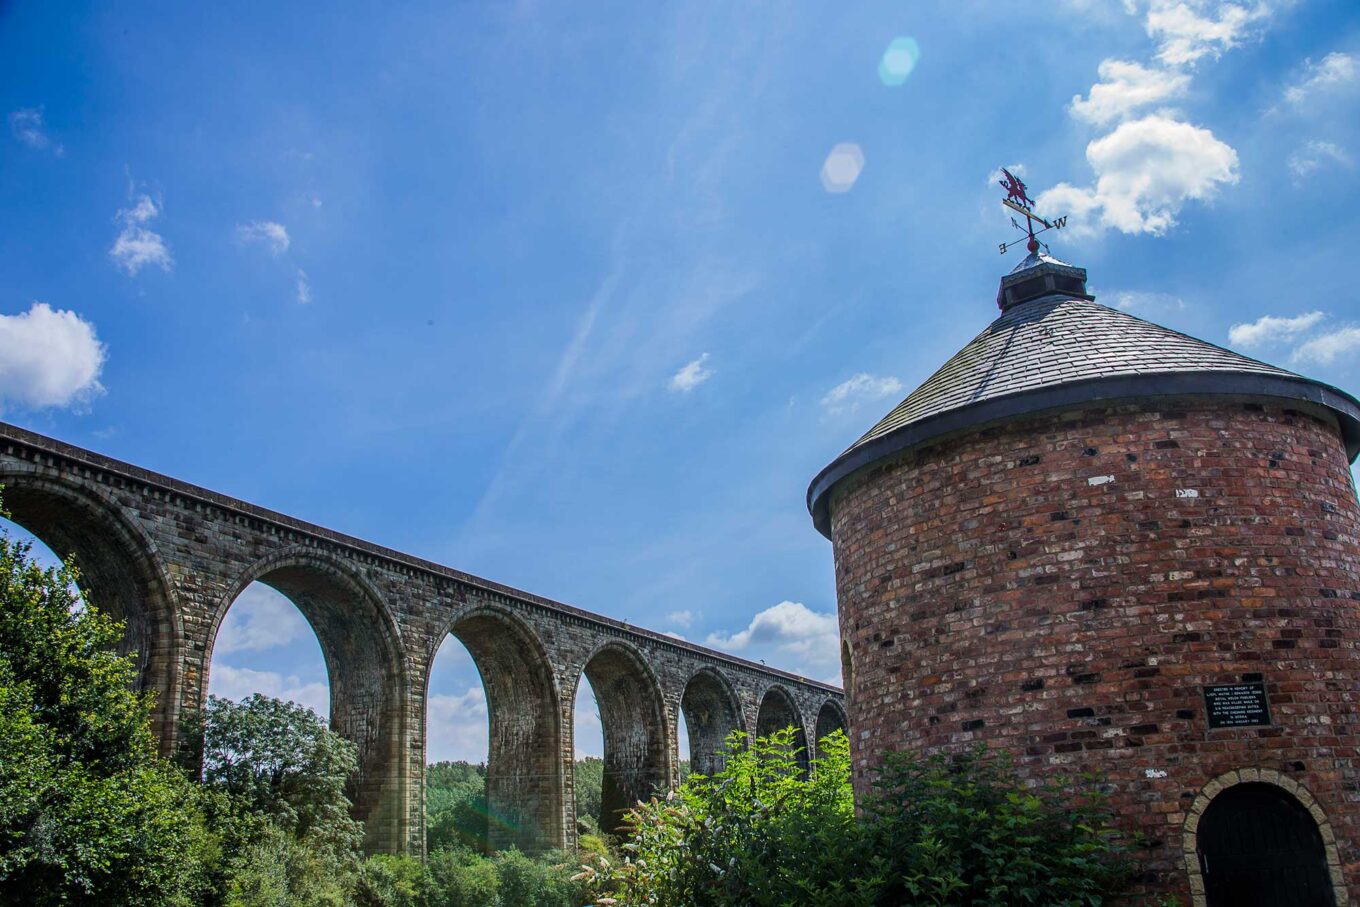 *Cefn Viaduct and roundhouse